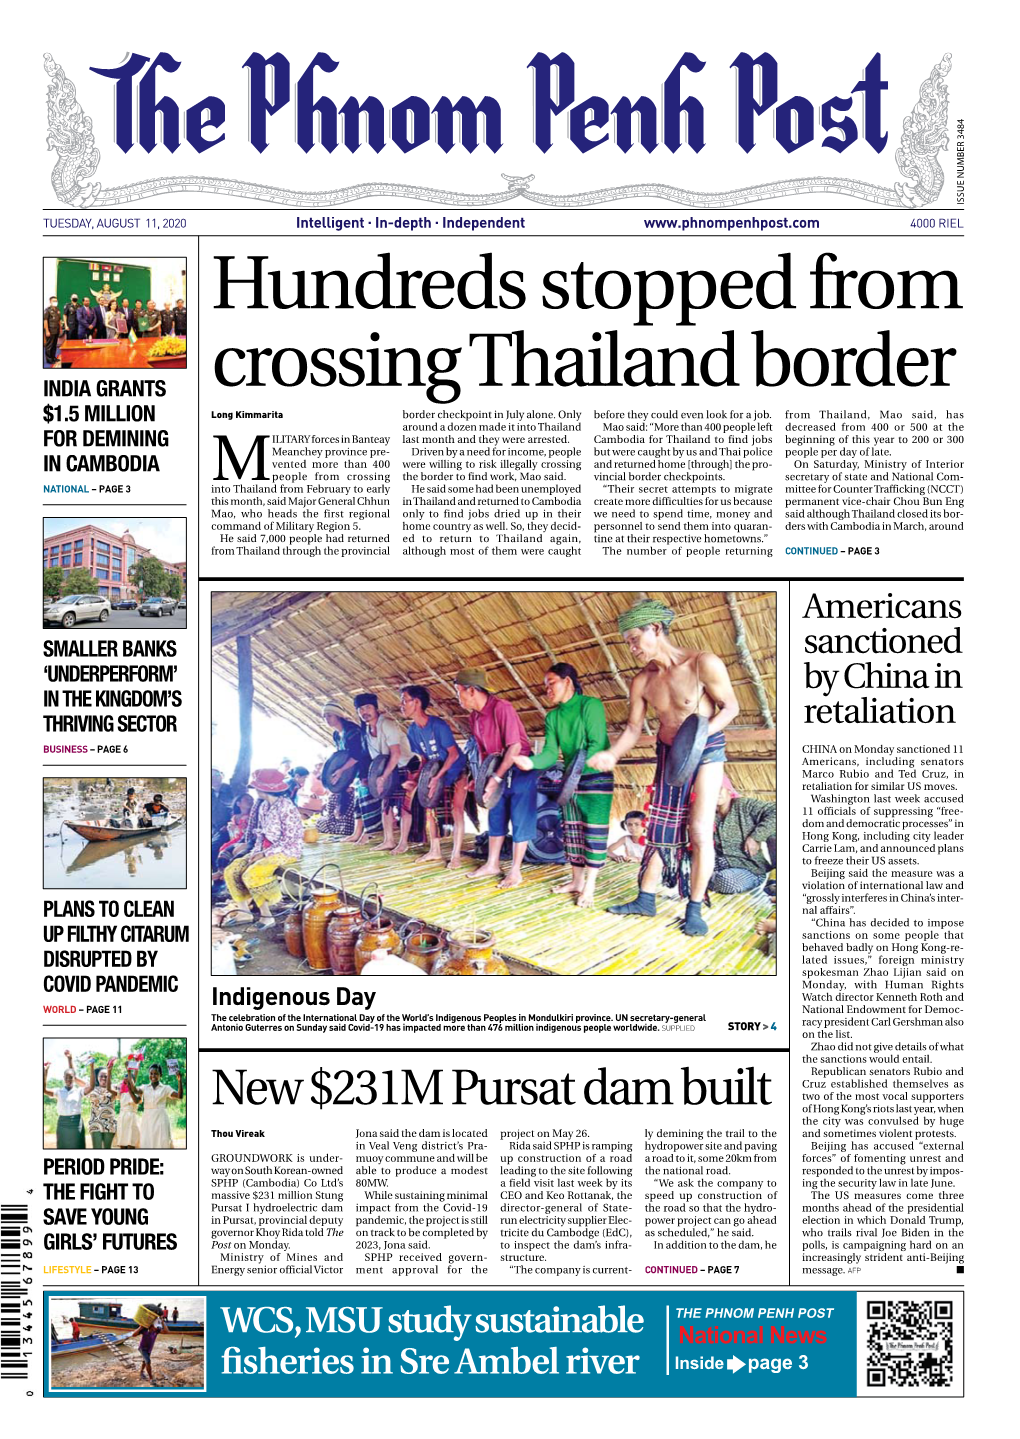 Hundreds Stopped from Crossing Thailand Border